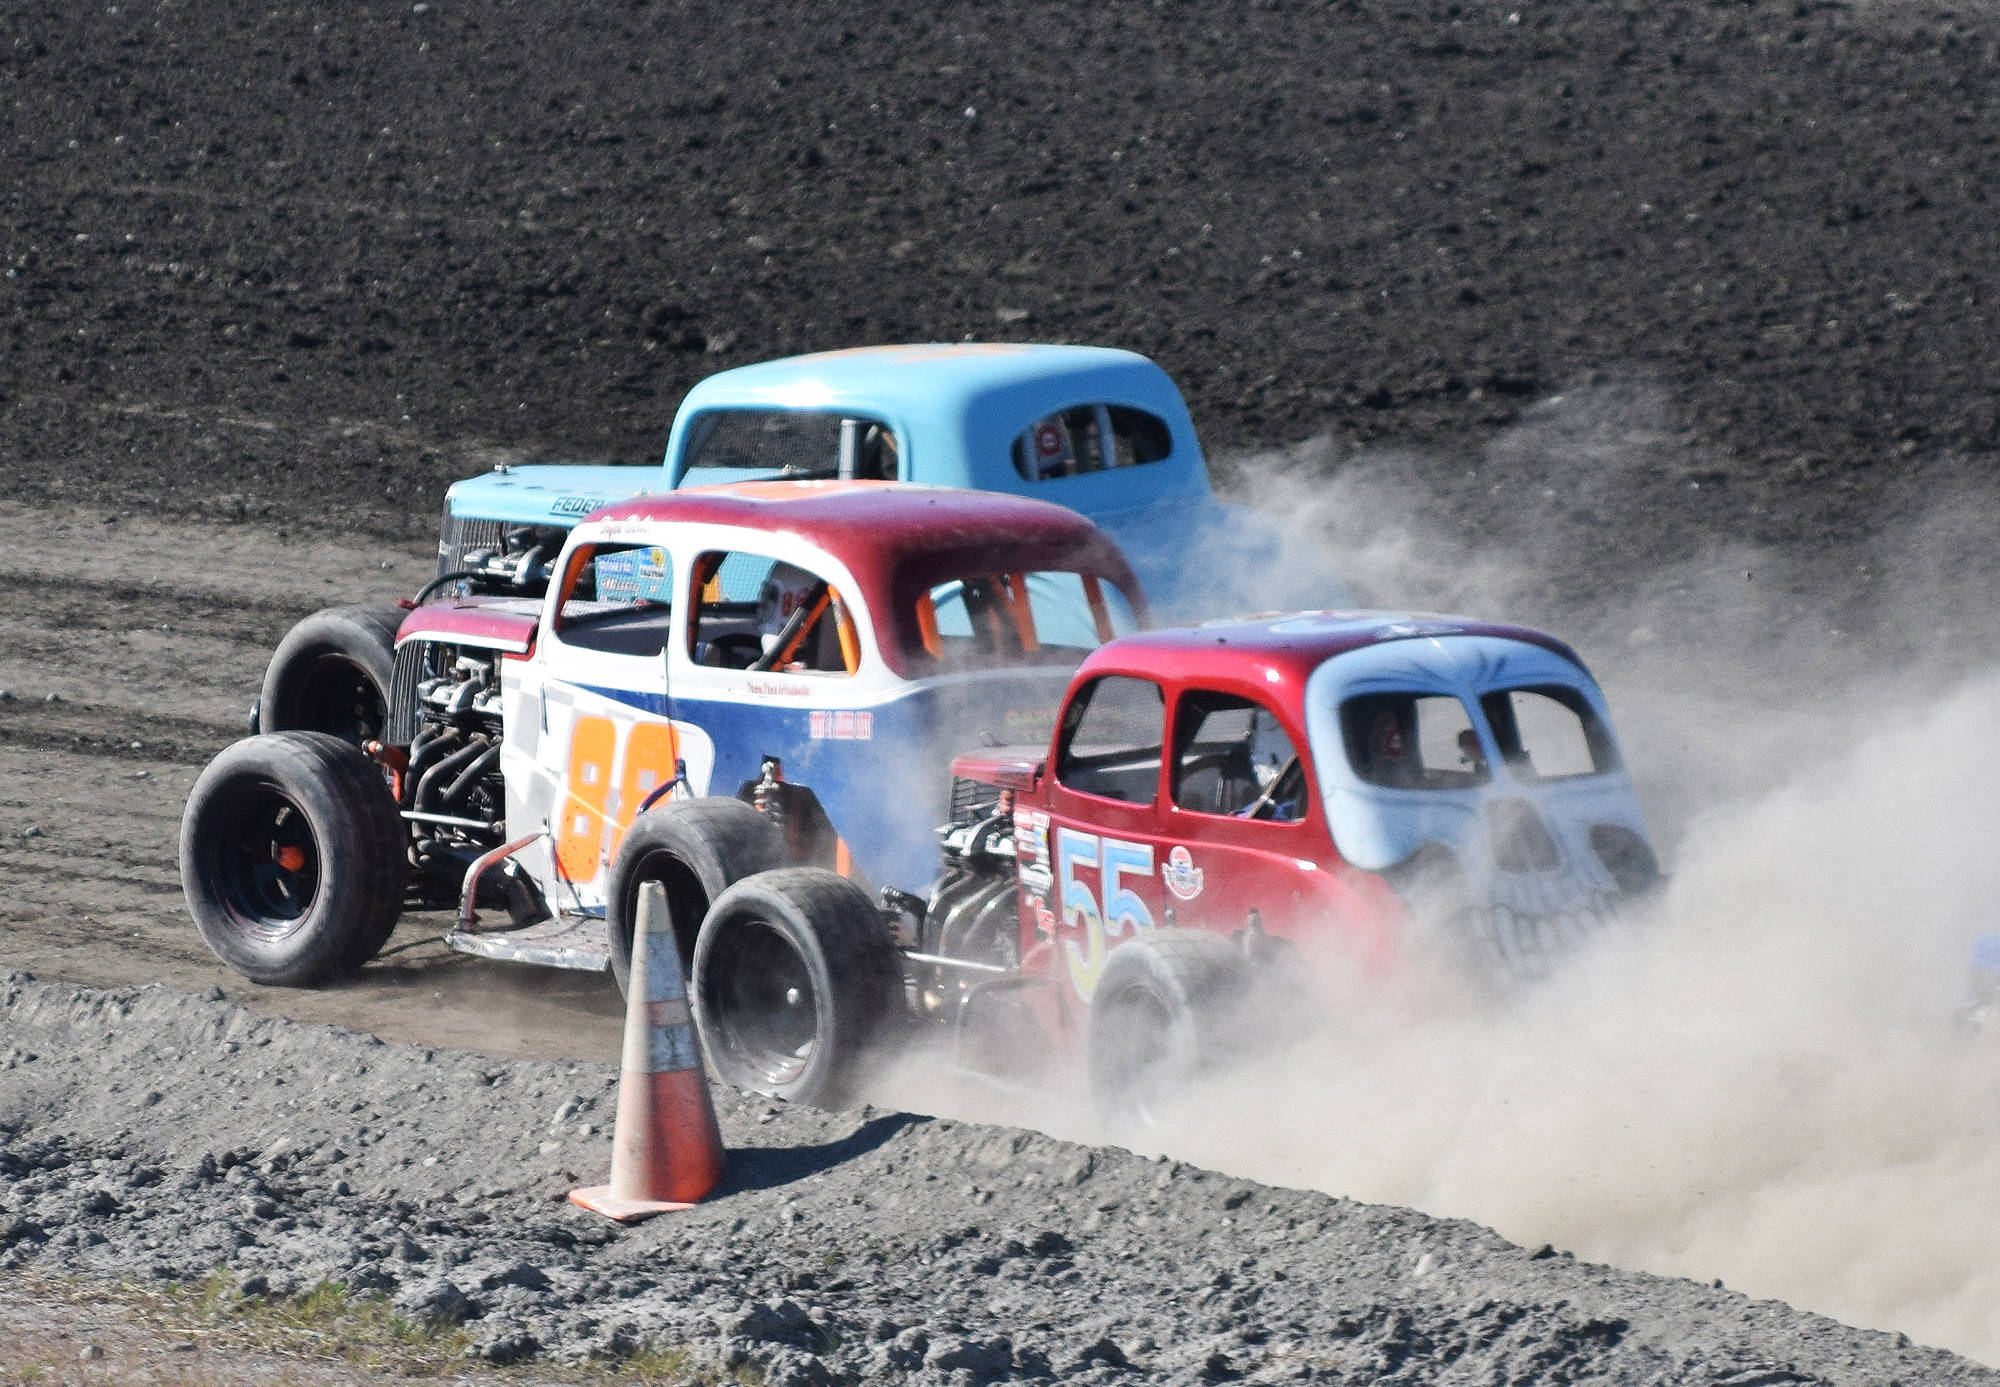 Bryan Barber (88) lead a tight pack of Legends drivers Saturday night at Twin City Raceway in Kenai. (Photo by Joey Klecka/Peninsula Clarion)